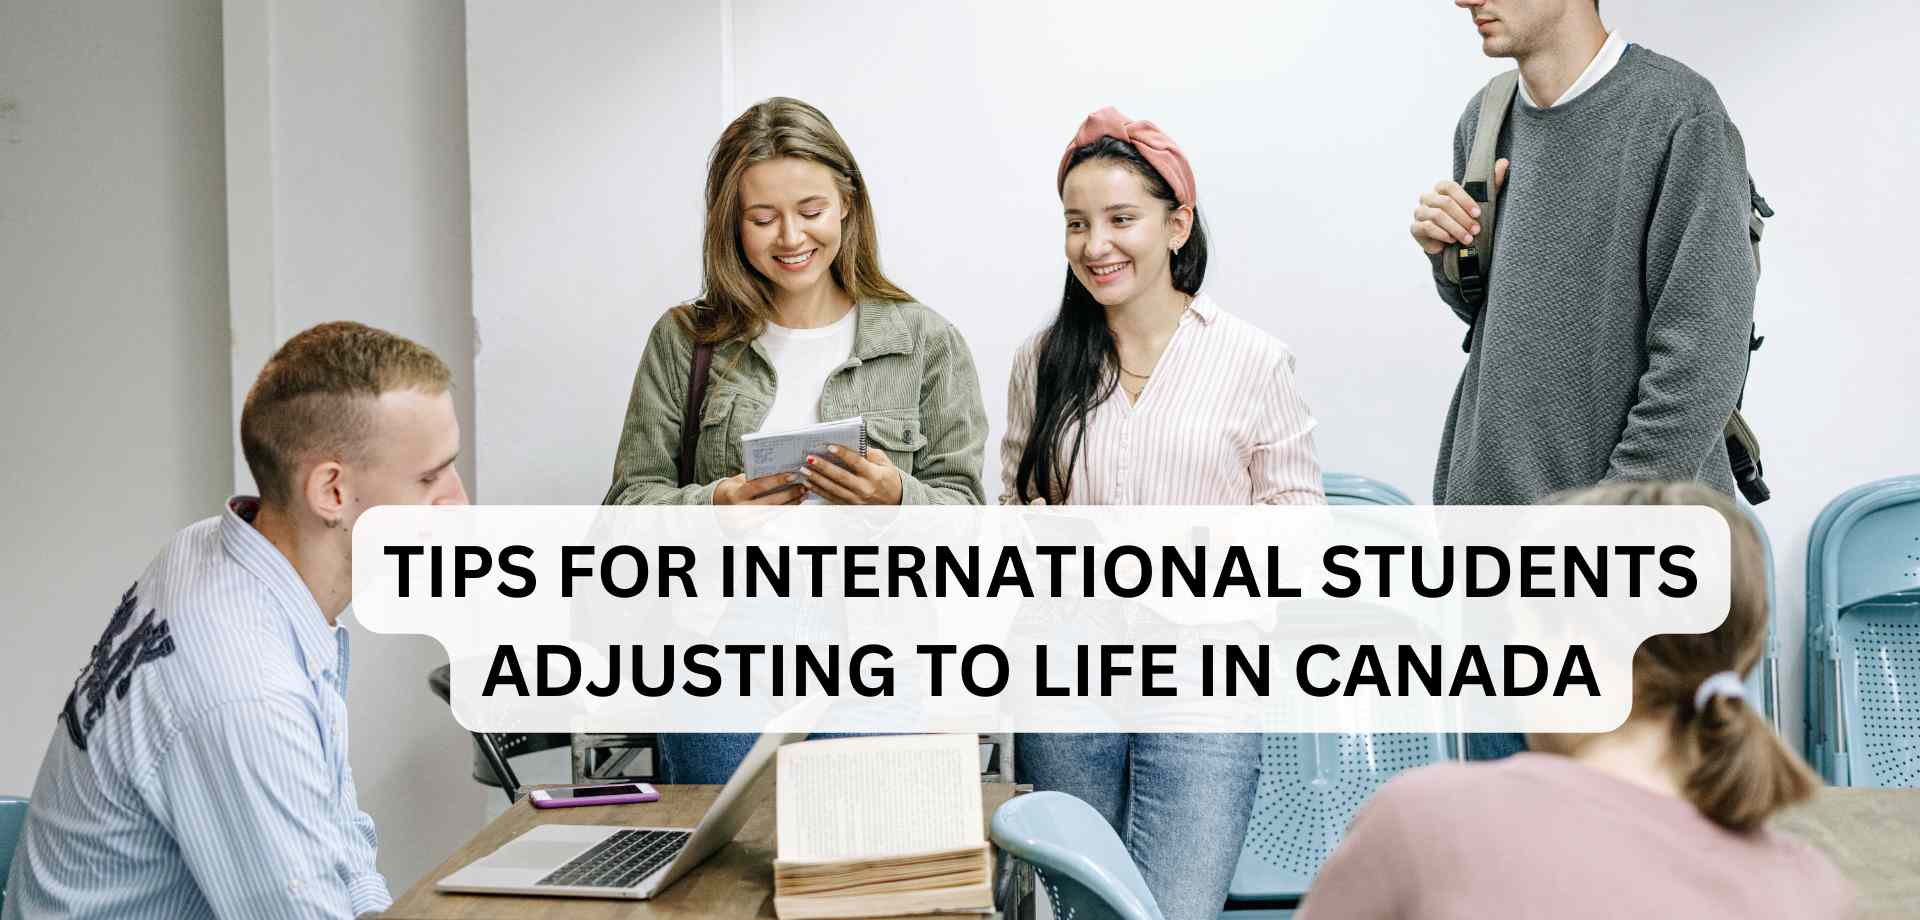 Tips for International Students Adjusting to Life in Canada